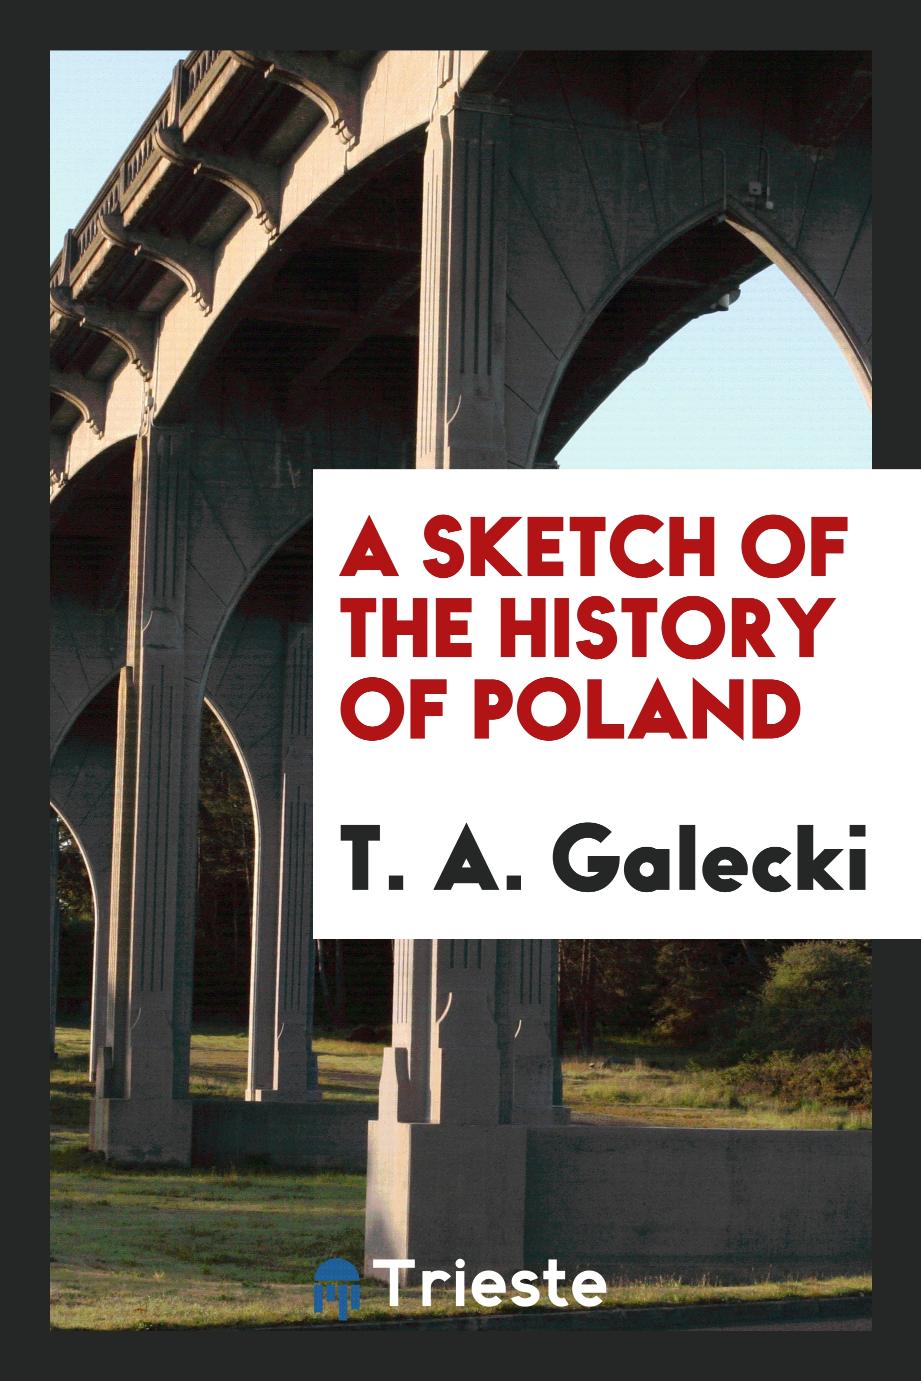 A sketch of the history of Poland